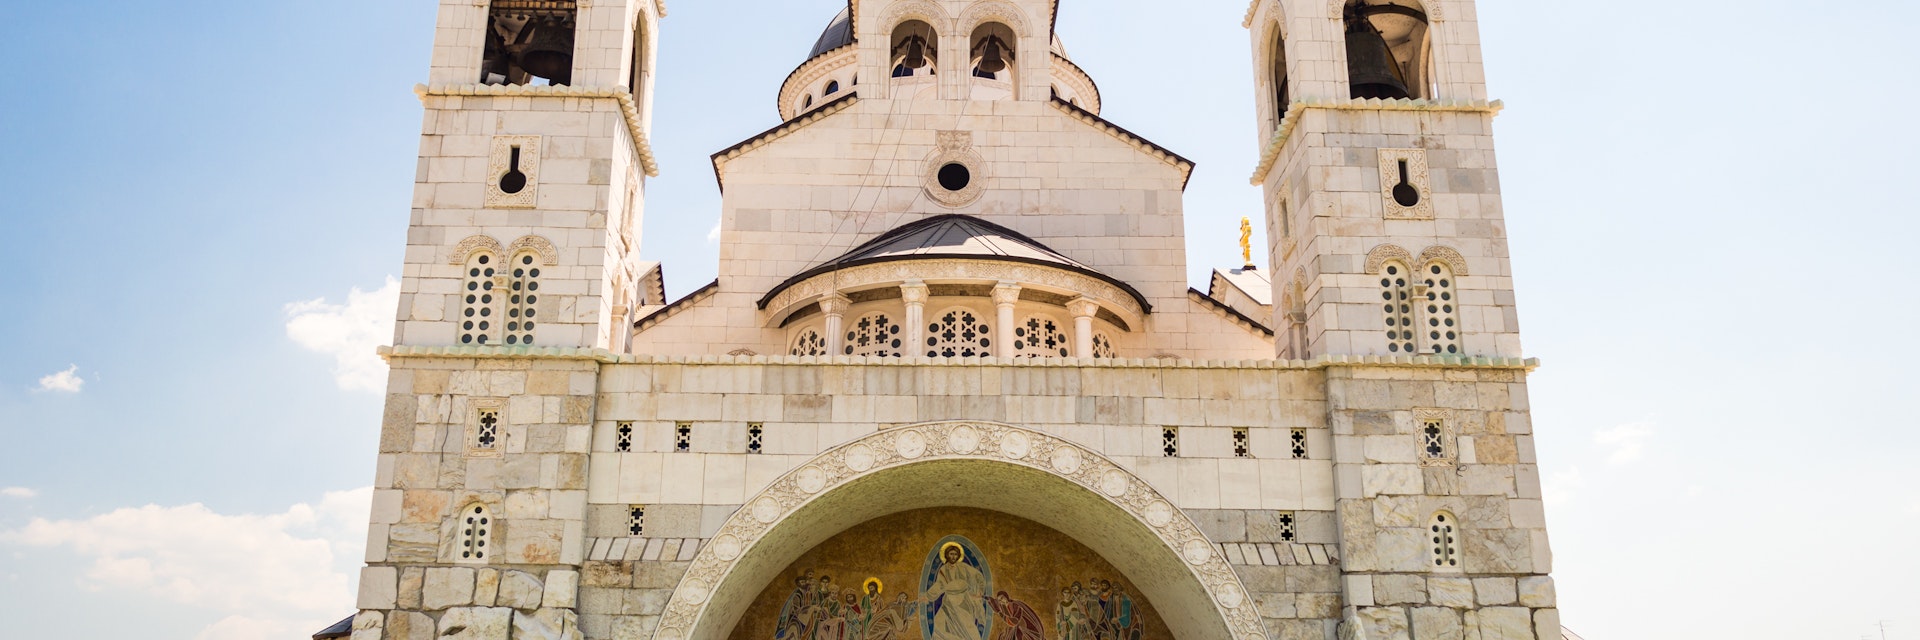 Cathedral of the Resurrection of Christ in Podgorica, Montenegro; Shutterstock ID 378824509; Your name (First / Last): Brana V; GL account no.: 65050; Netsuite department name: Online Editorial; Full Product or Project name including edition: Podgorica destination page